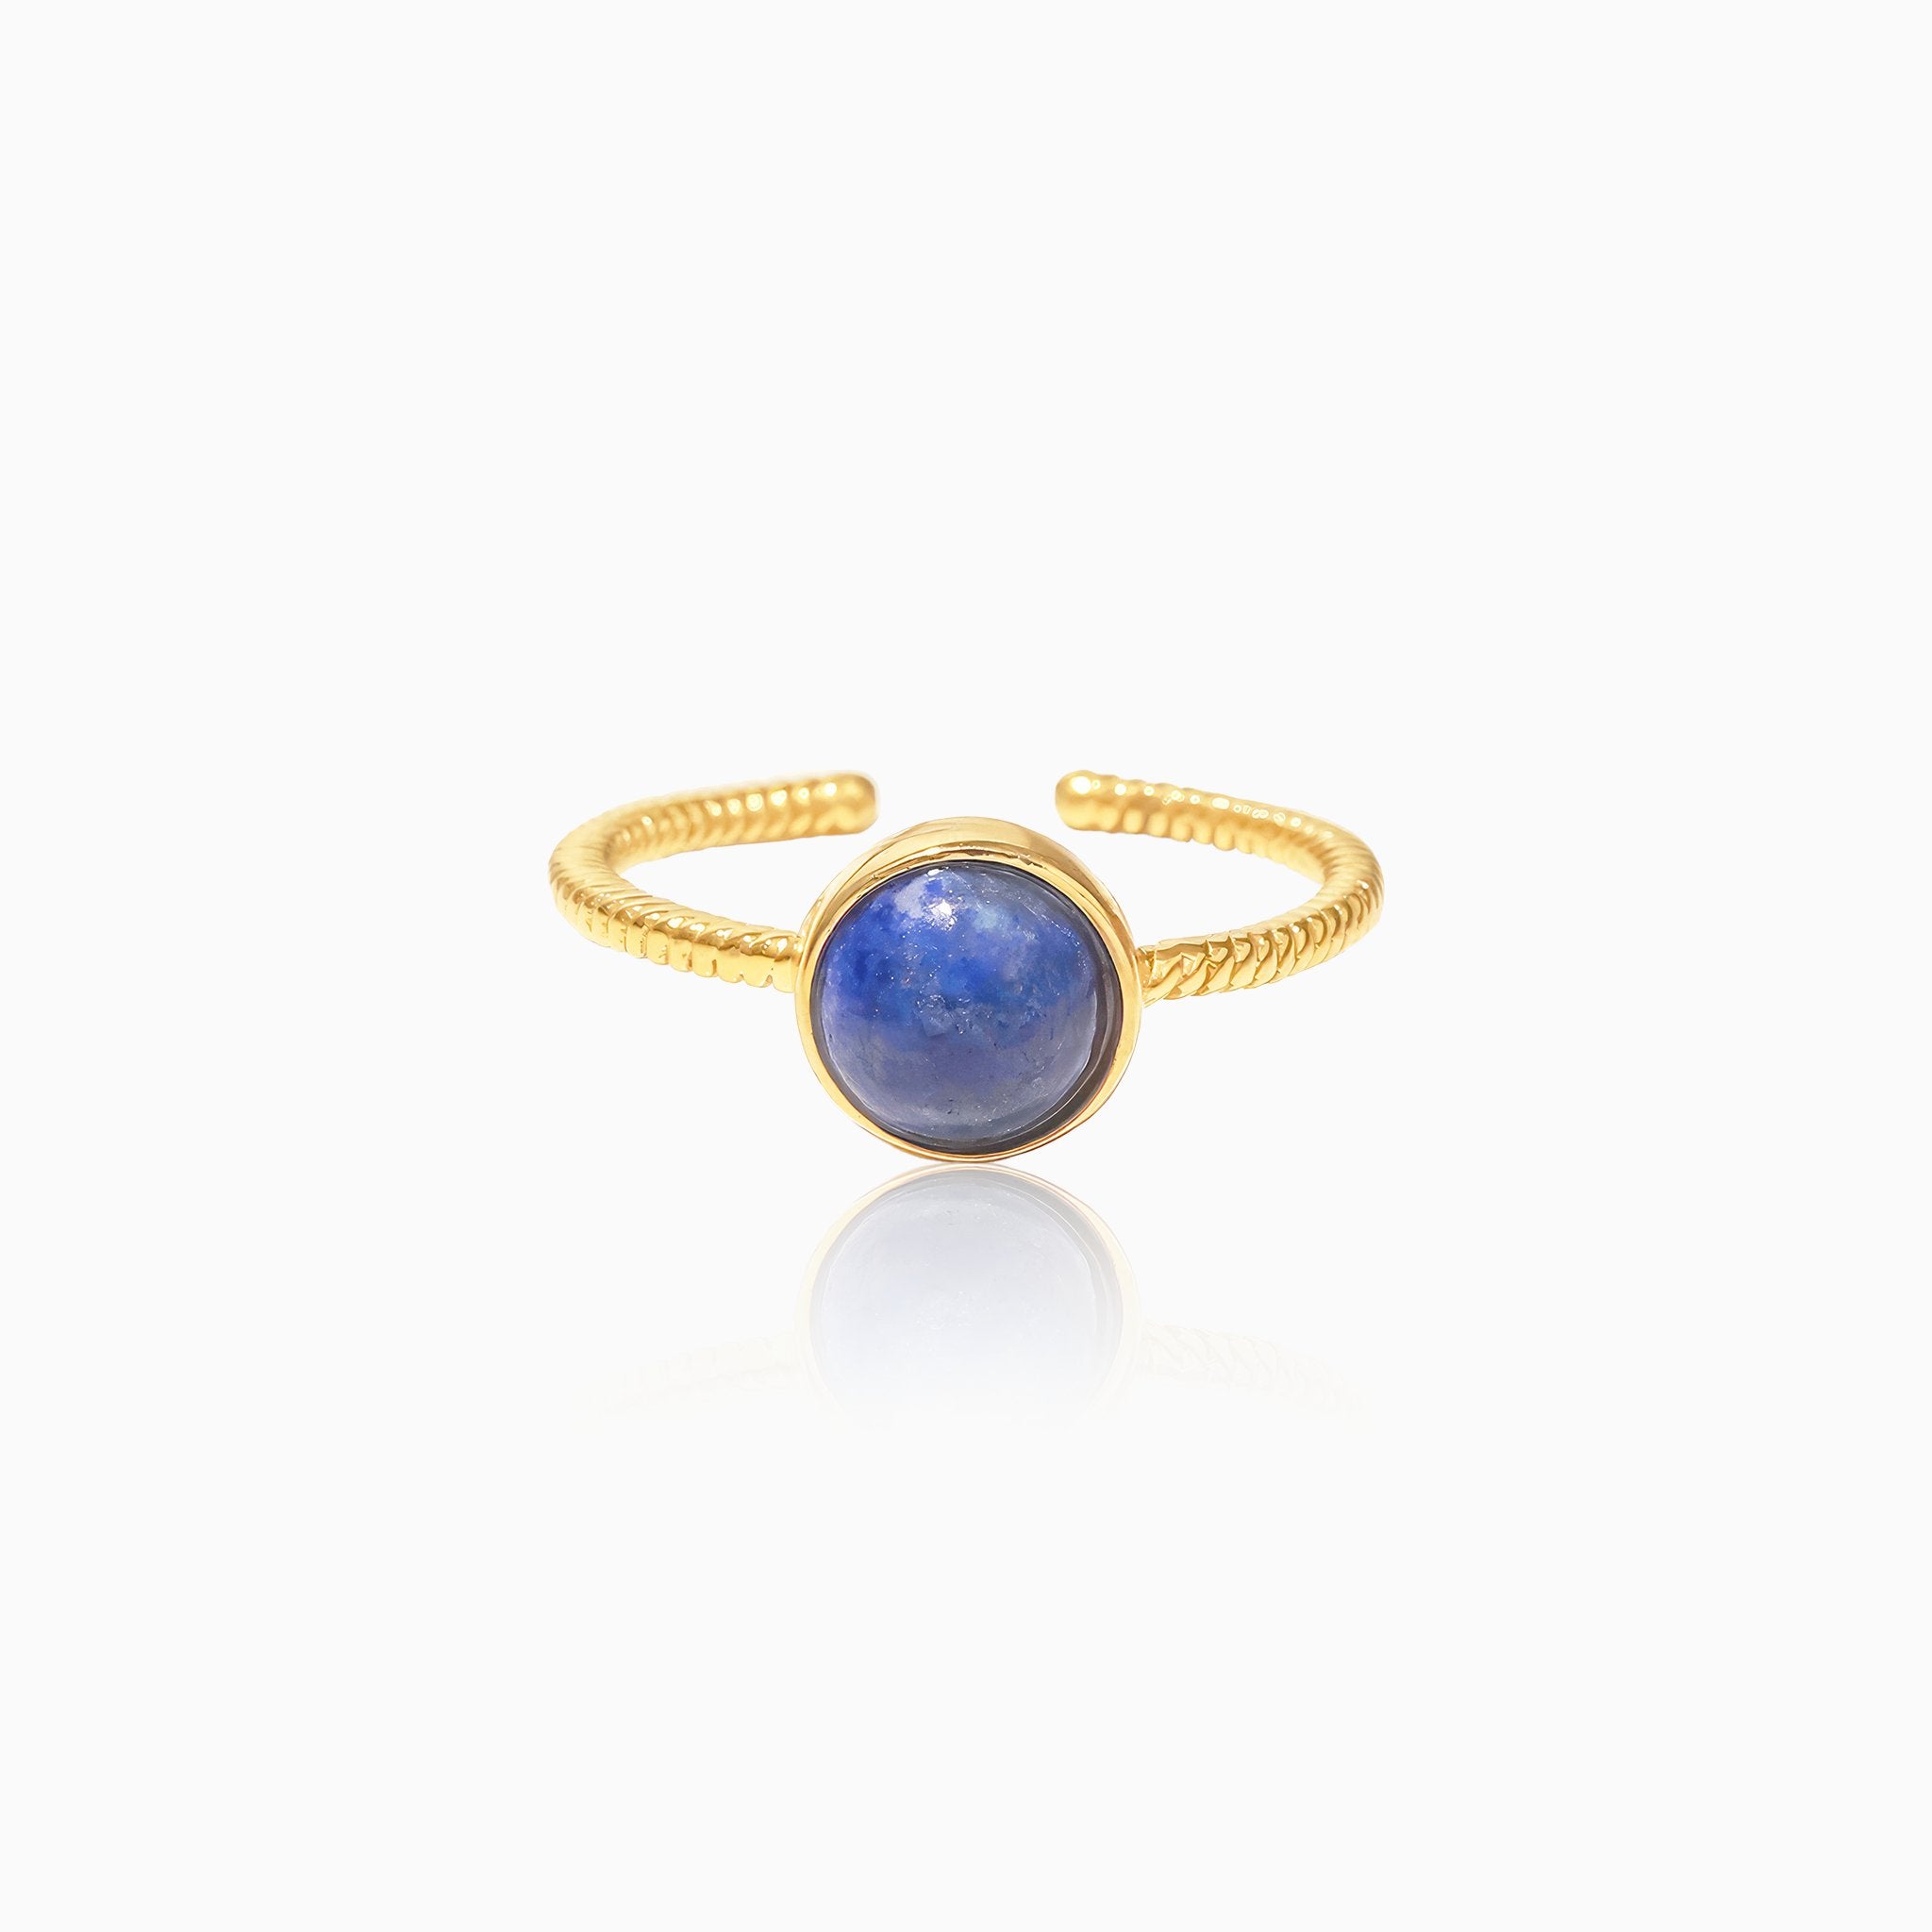 Lapis Lazuli Adjustable Twist Ring - Nobbier - Ring - 18K Gold And Titanium PVD Coated Jewelry